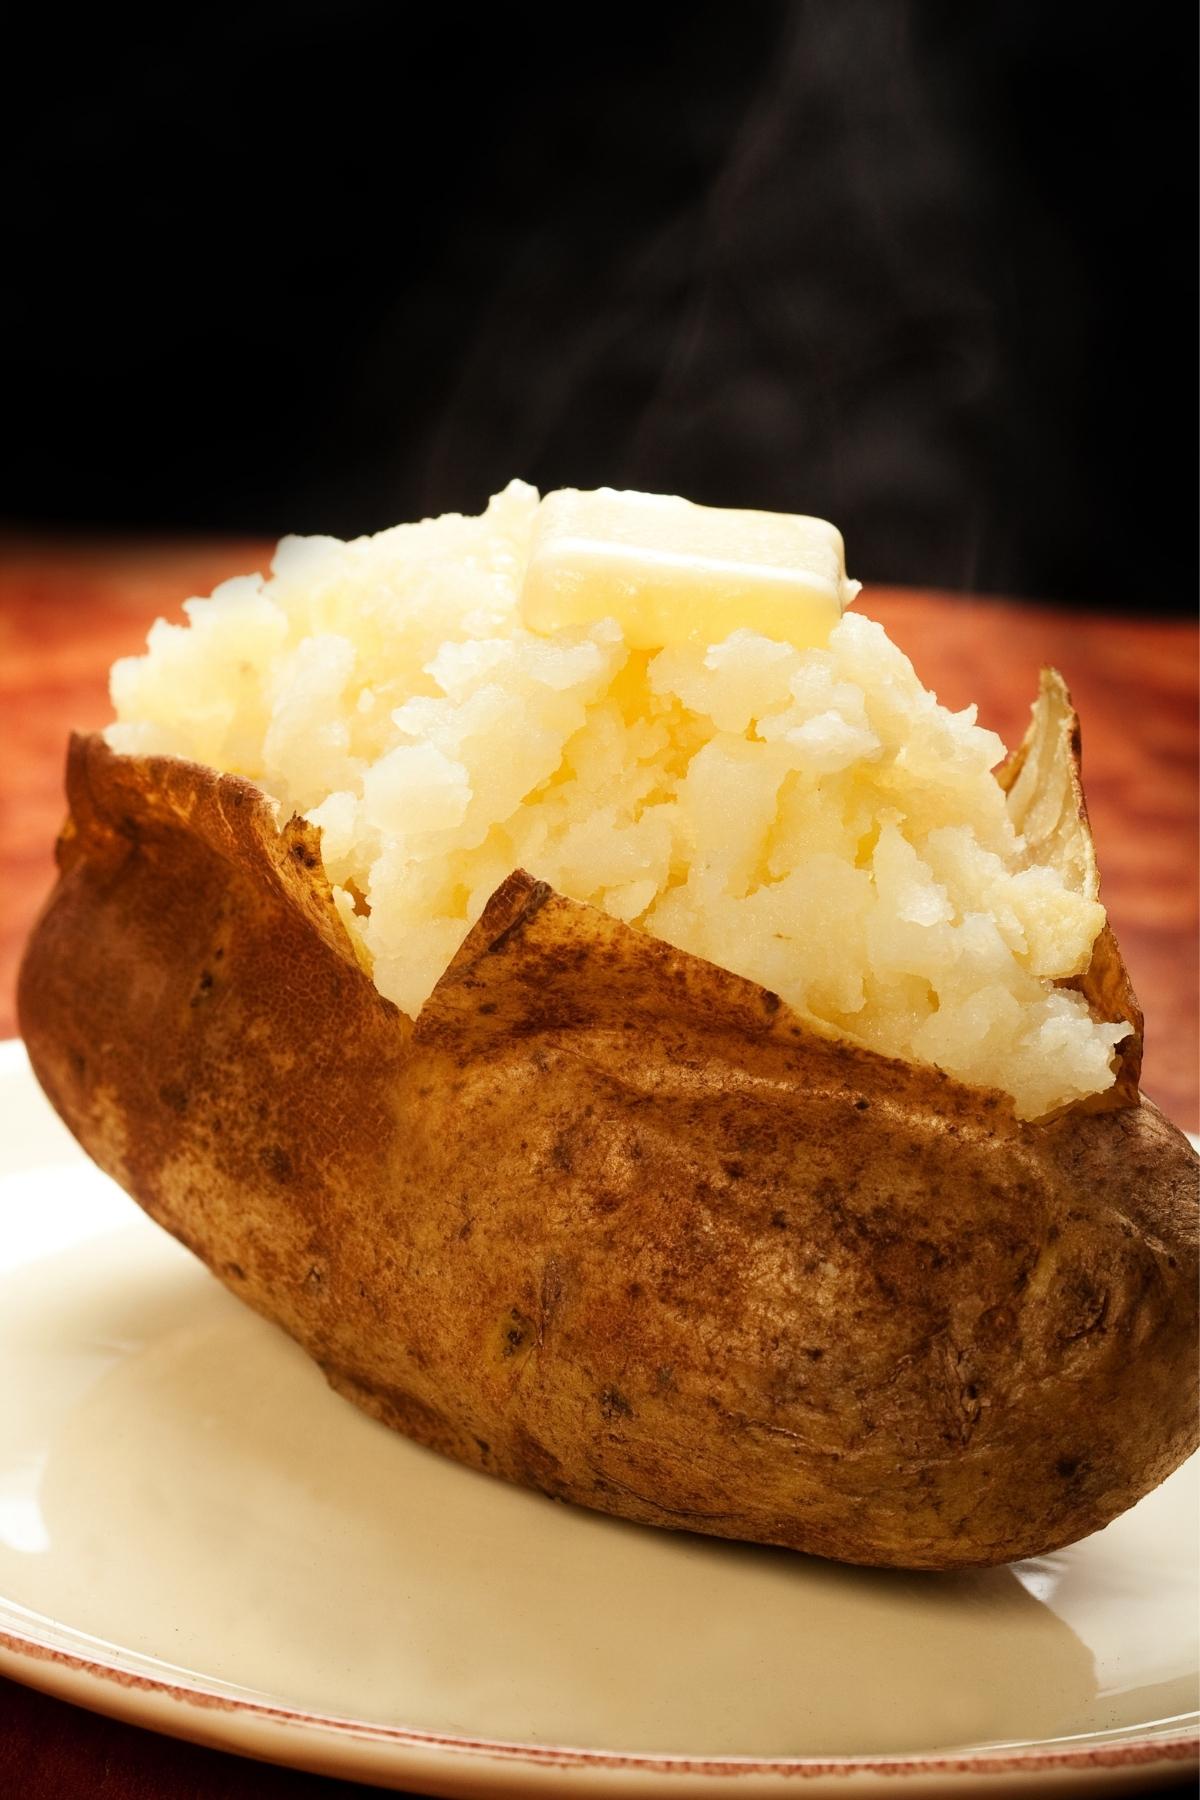 Baked potato without foil